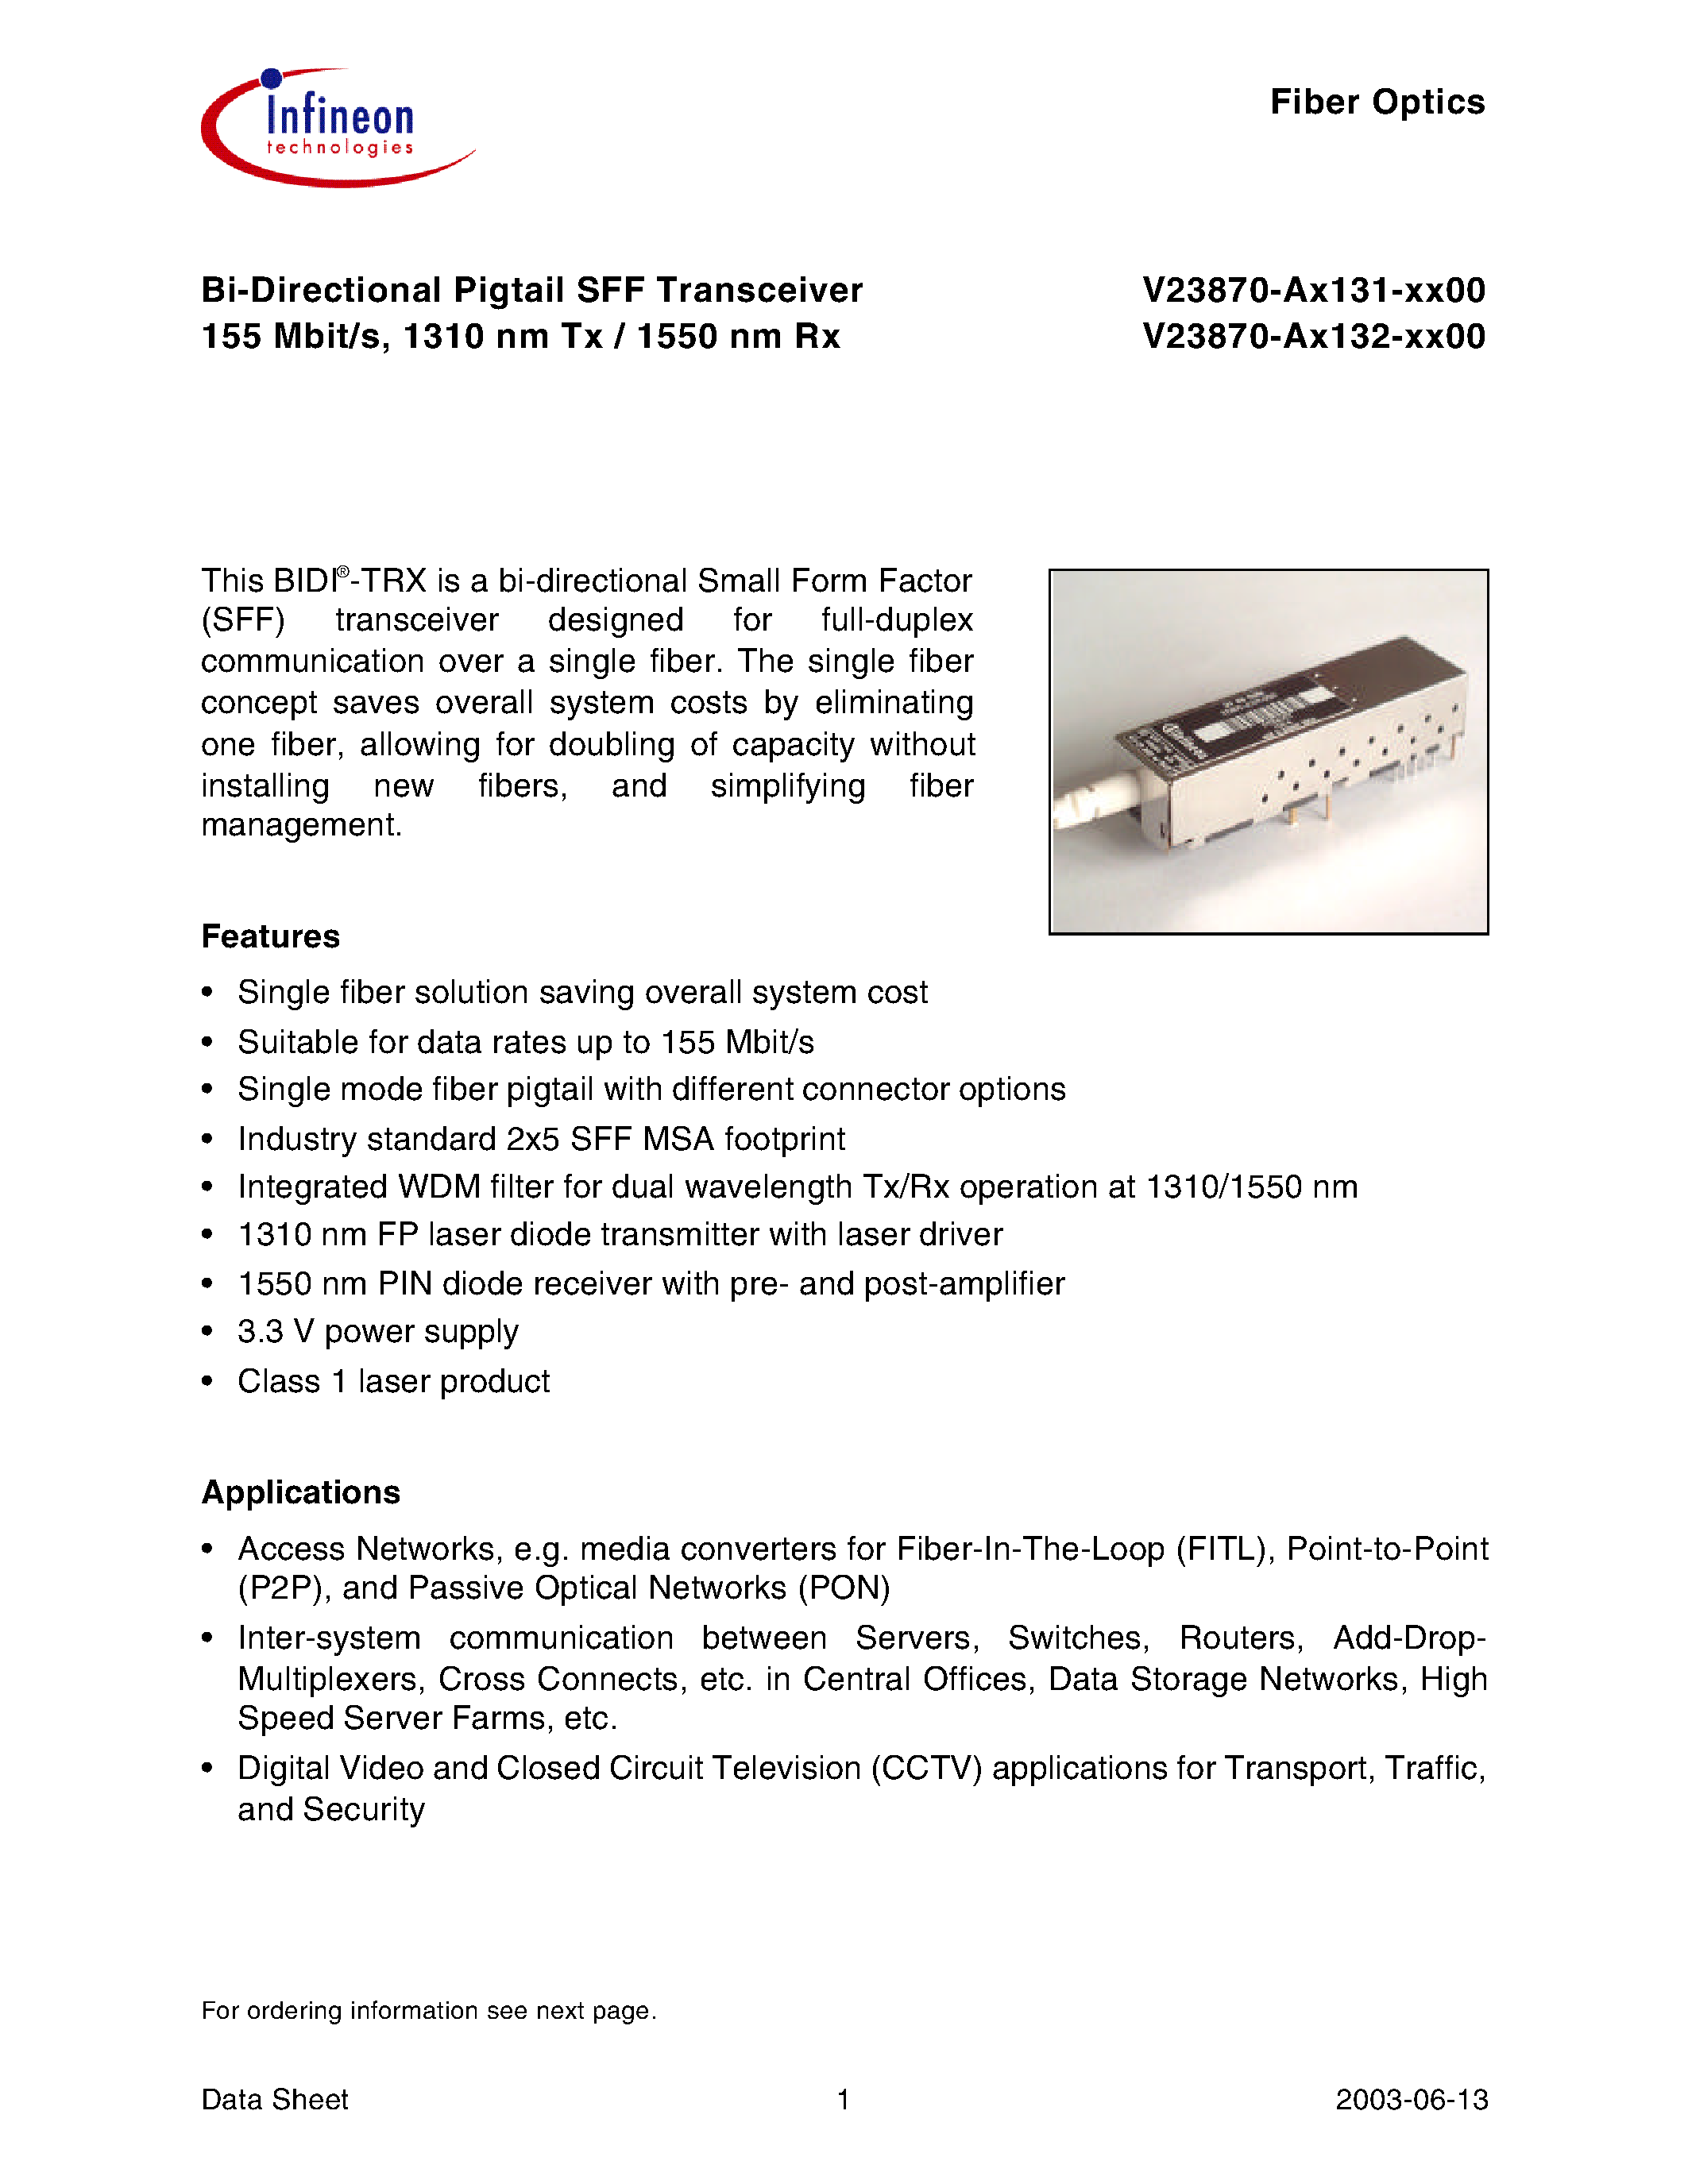 Datasheet V23870-A1132-A100 - Bi-Directional Pigtail SFF Transceiver 155 Mbit/s/ 1310 nm Tx / 1550 nm Rx page 1